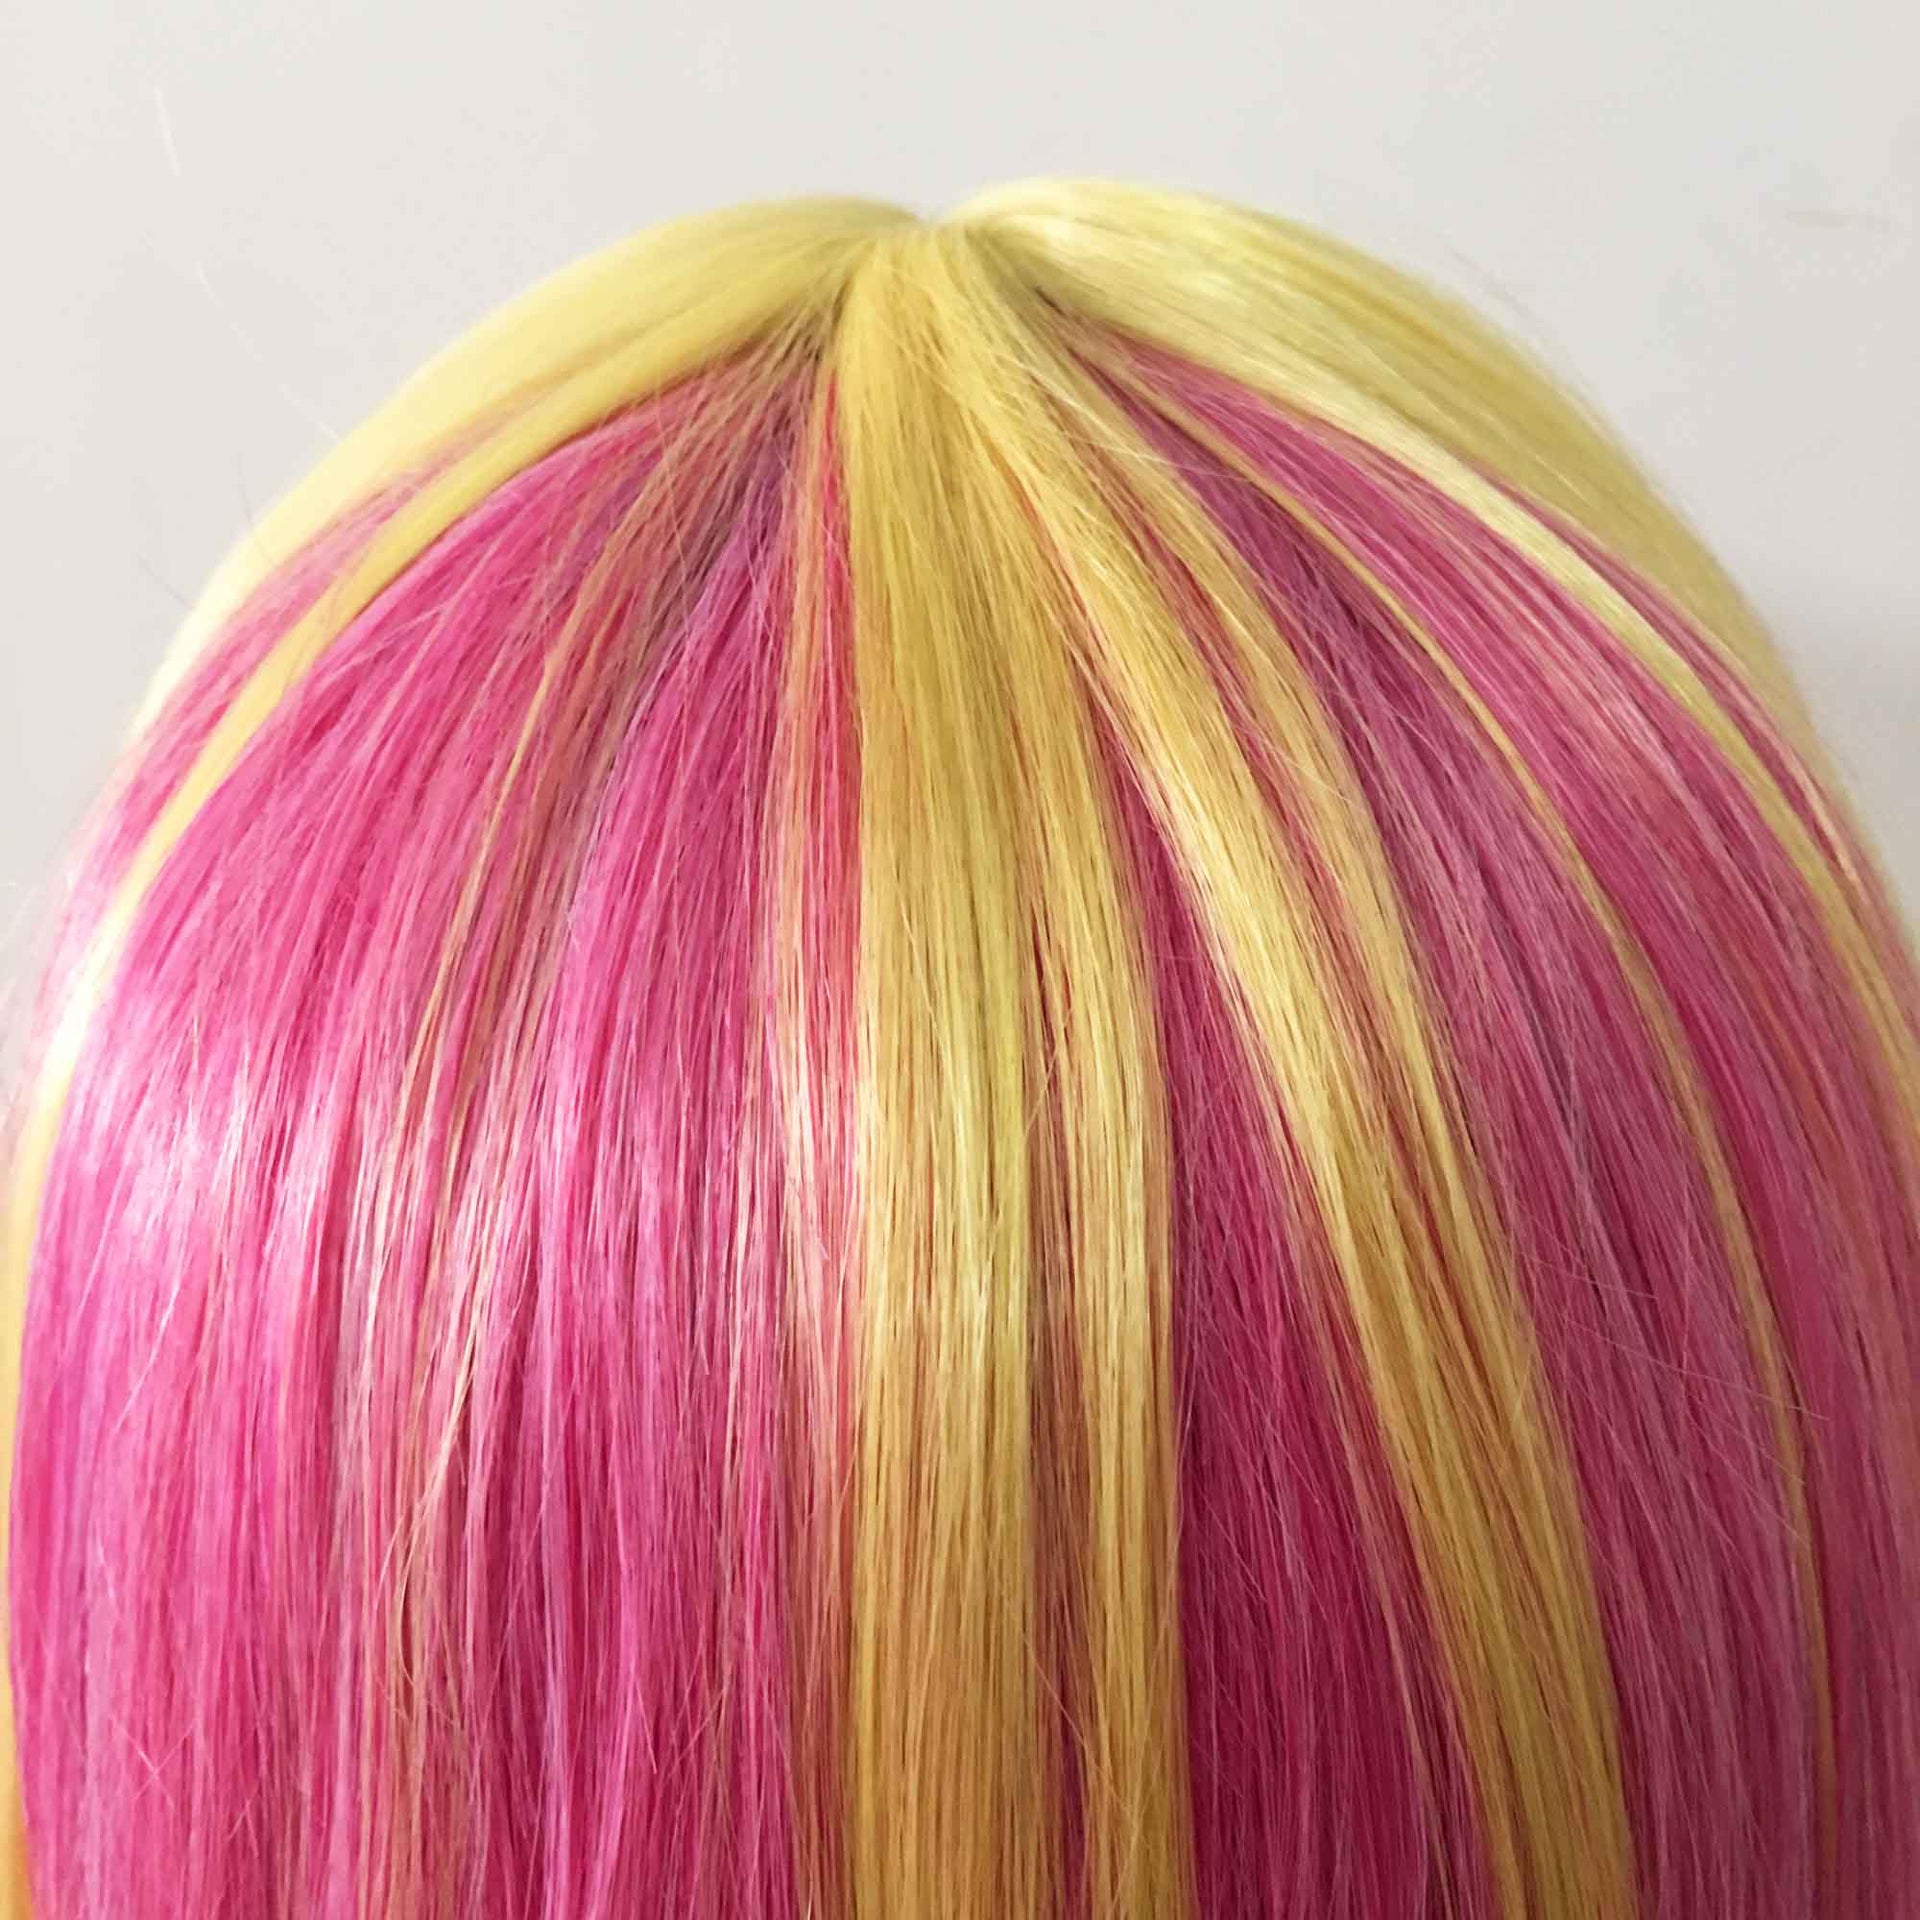 nevermindyrhead Women Two tone Yellow Pink Long Wavy Middle Part Wig